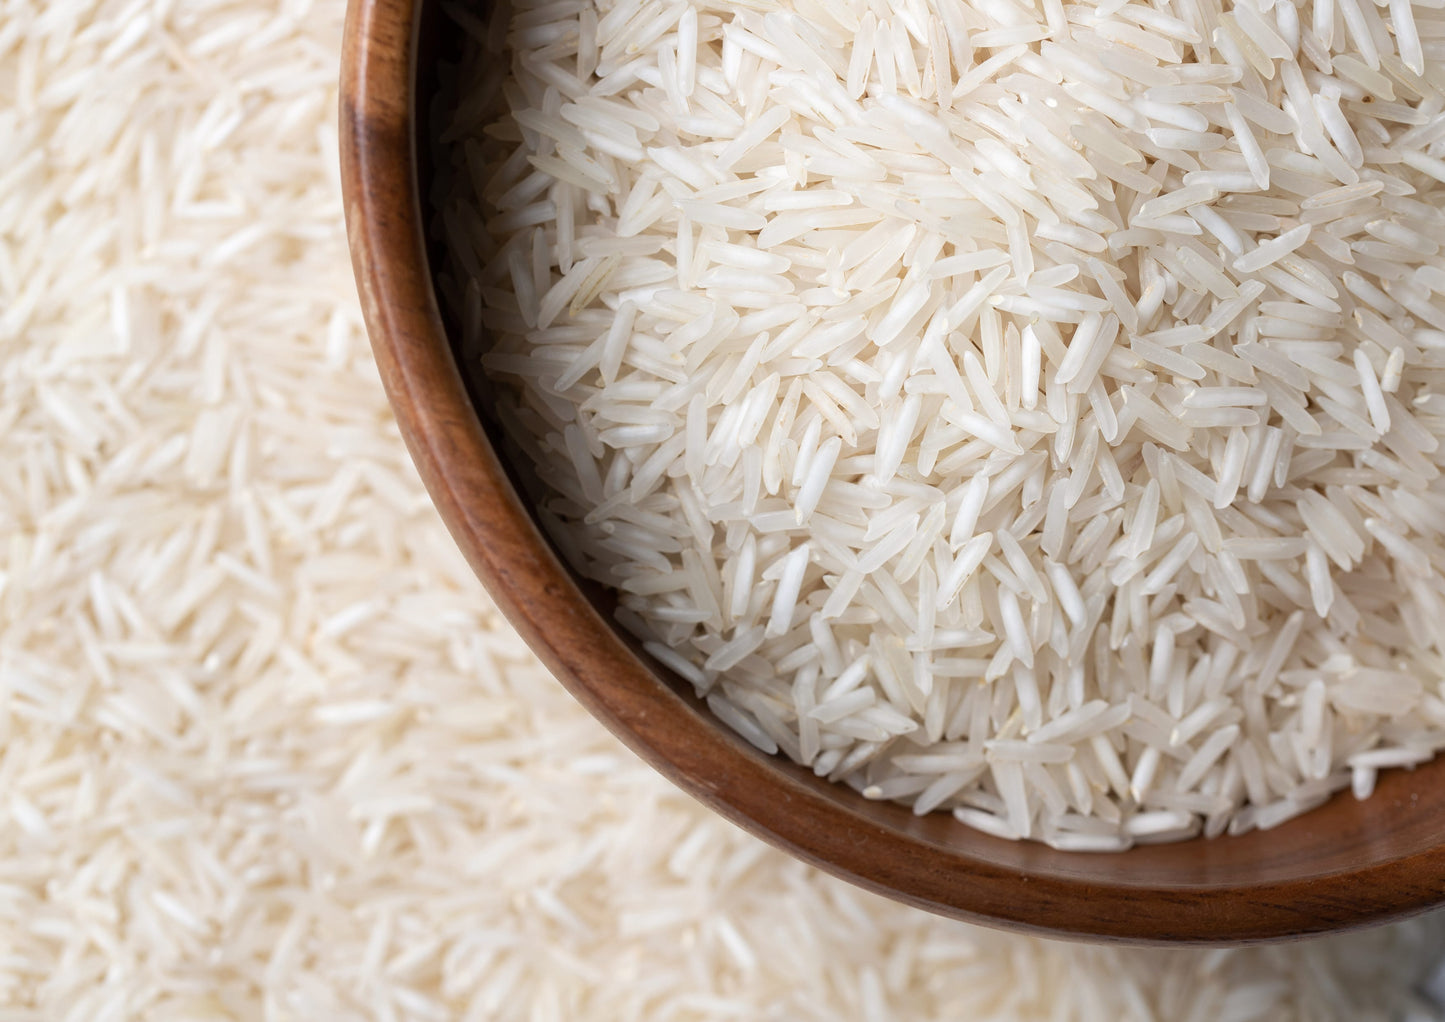 Long Grain White Rice — Raw, Vegan, Kosher, Bulk. Easy to Cook. Stays Separate and Fluffy. Rich in Iron and Low in Fat. Great as Side Dish. Perfect for Stuffing, Pilafs, and Salads